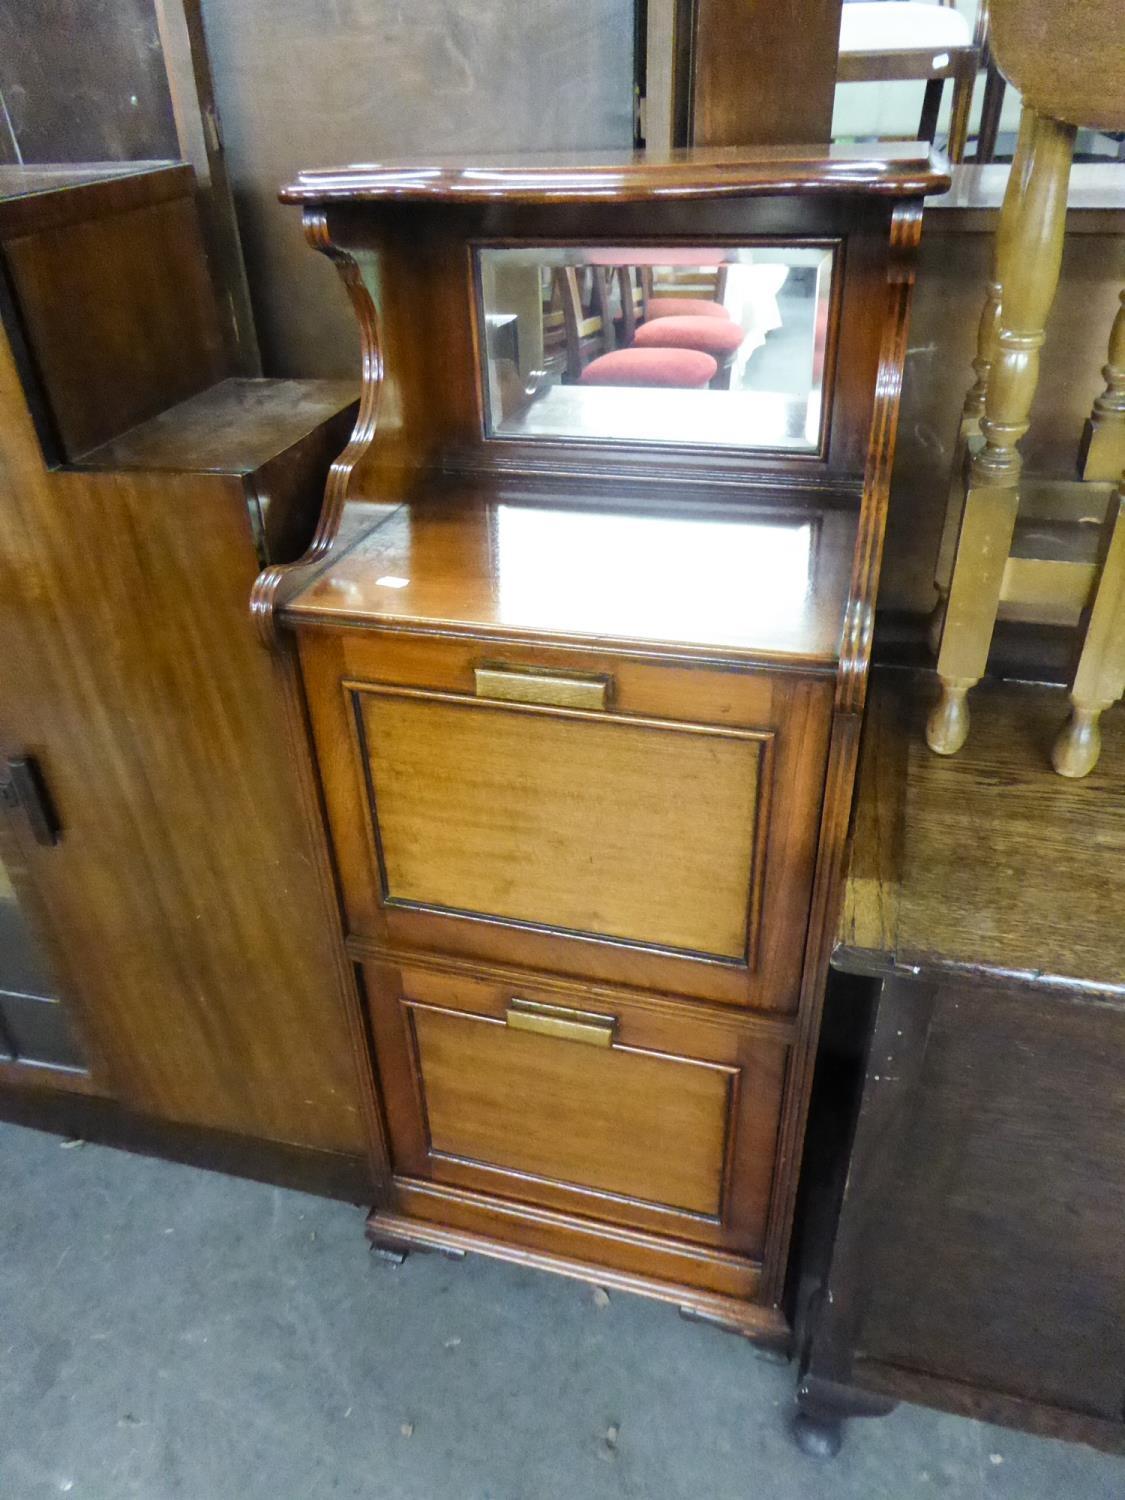 EDWARDIAN MUSIC AND RECORD CABINET, RAISED MIRROR BACK OVER FALL FRONT MUSC COMPARTMENT, OVER FALL